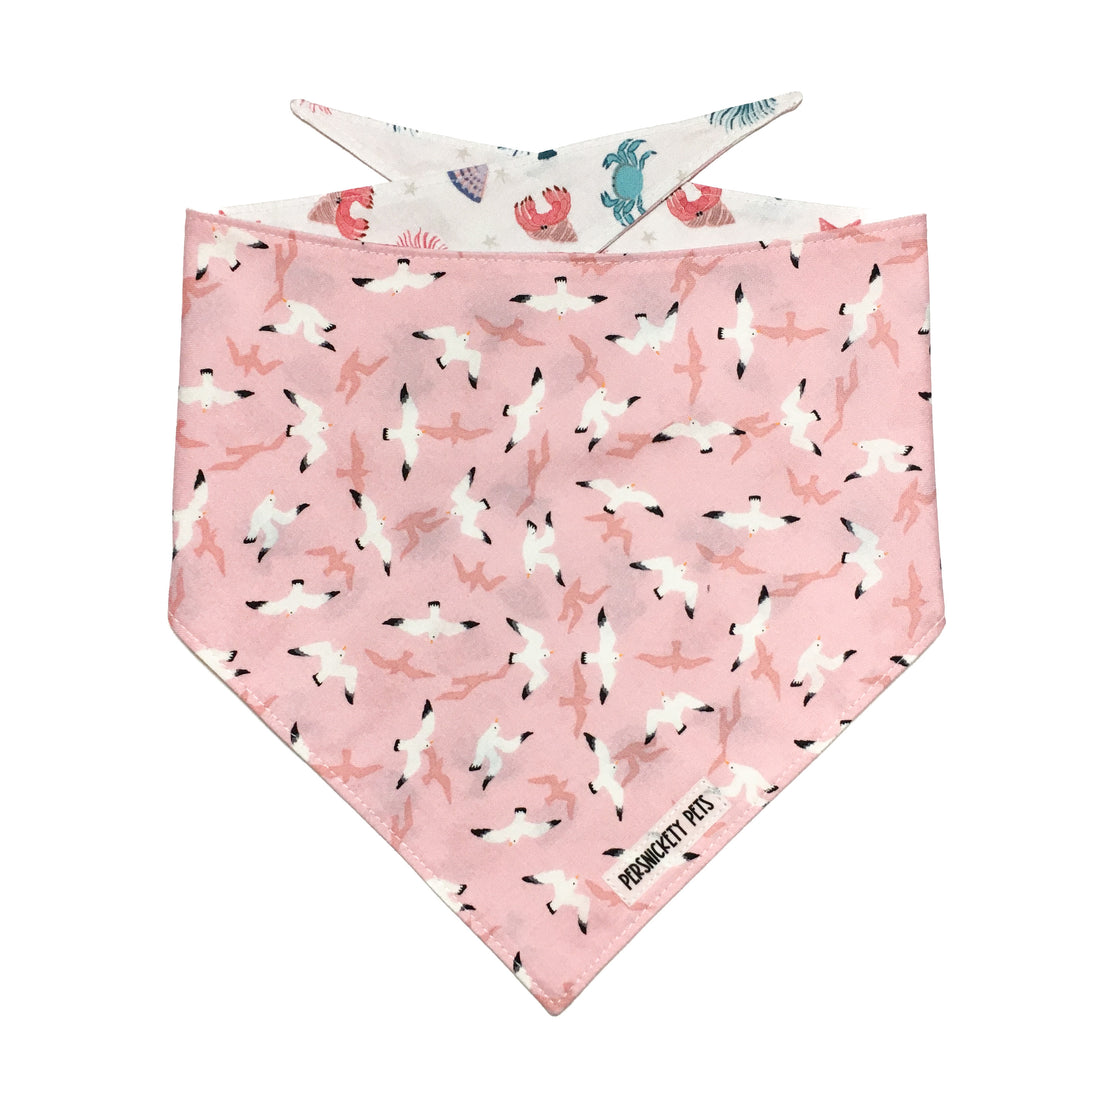 Persnickety Pets: seagulls and sand critters reversible bandana, front